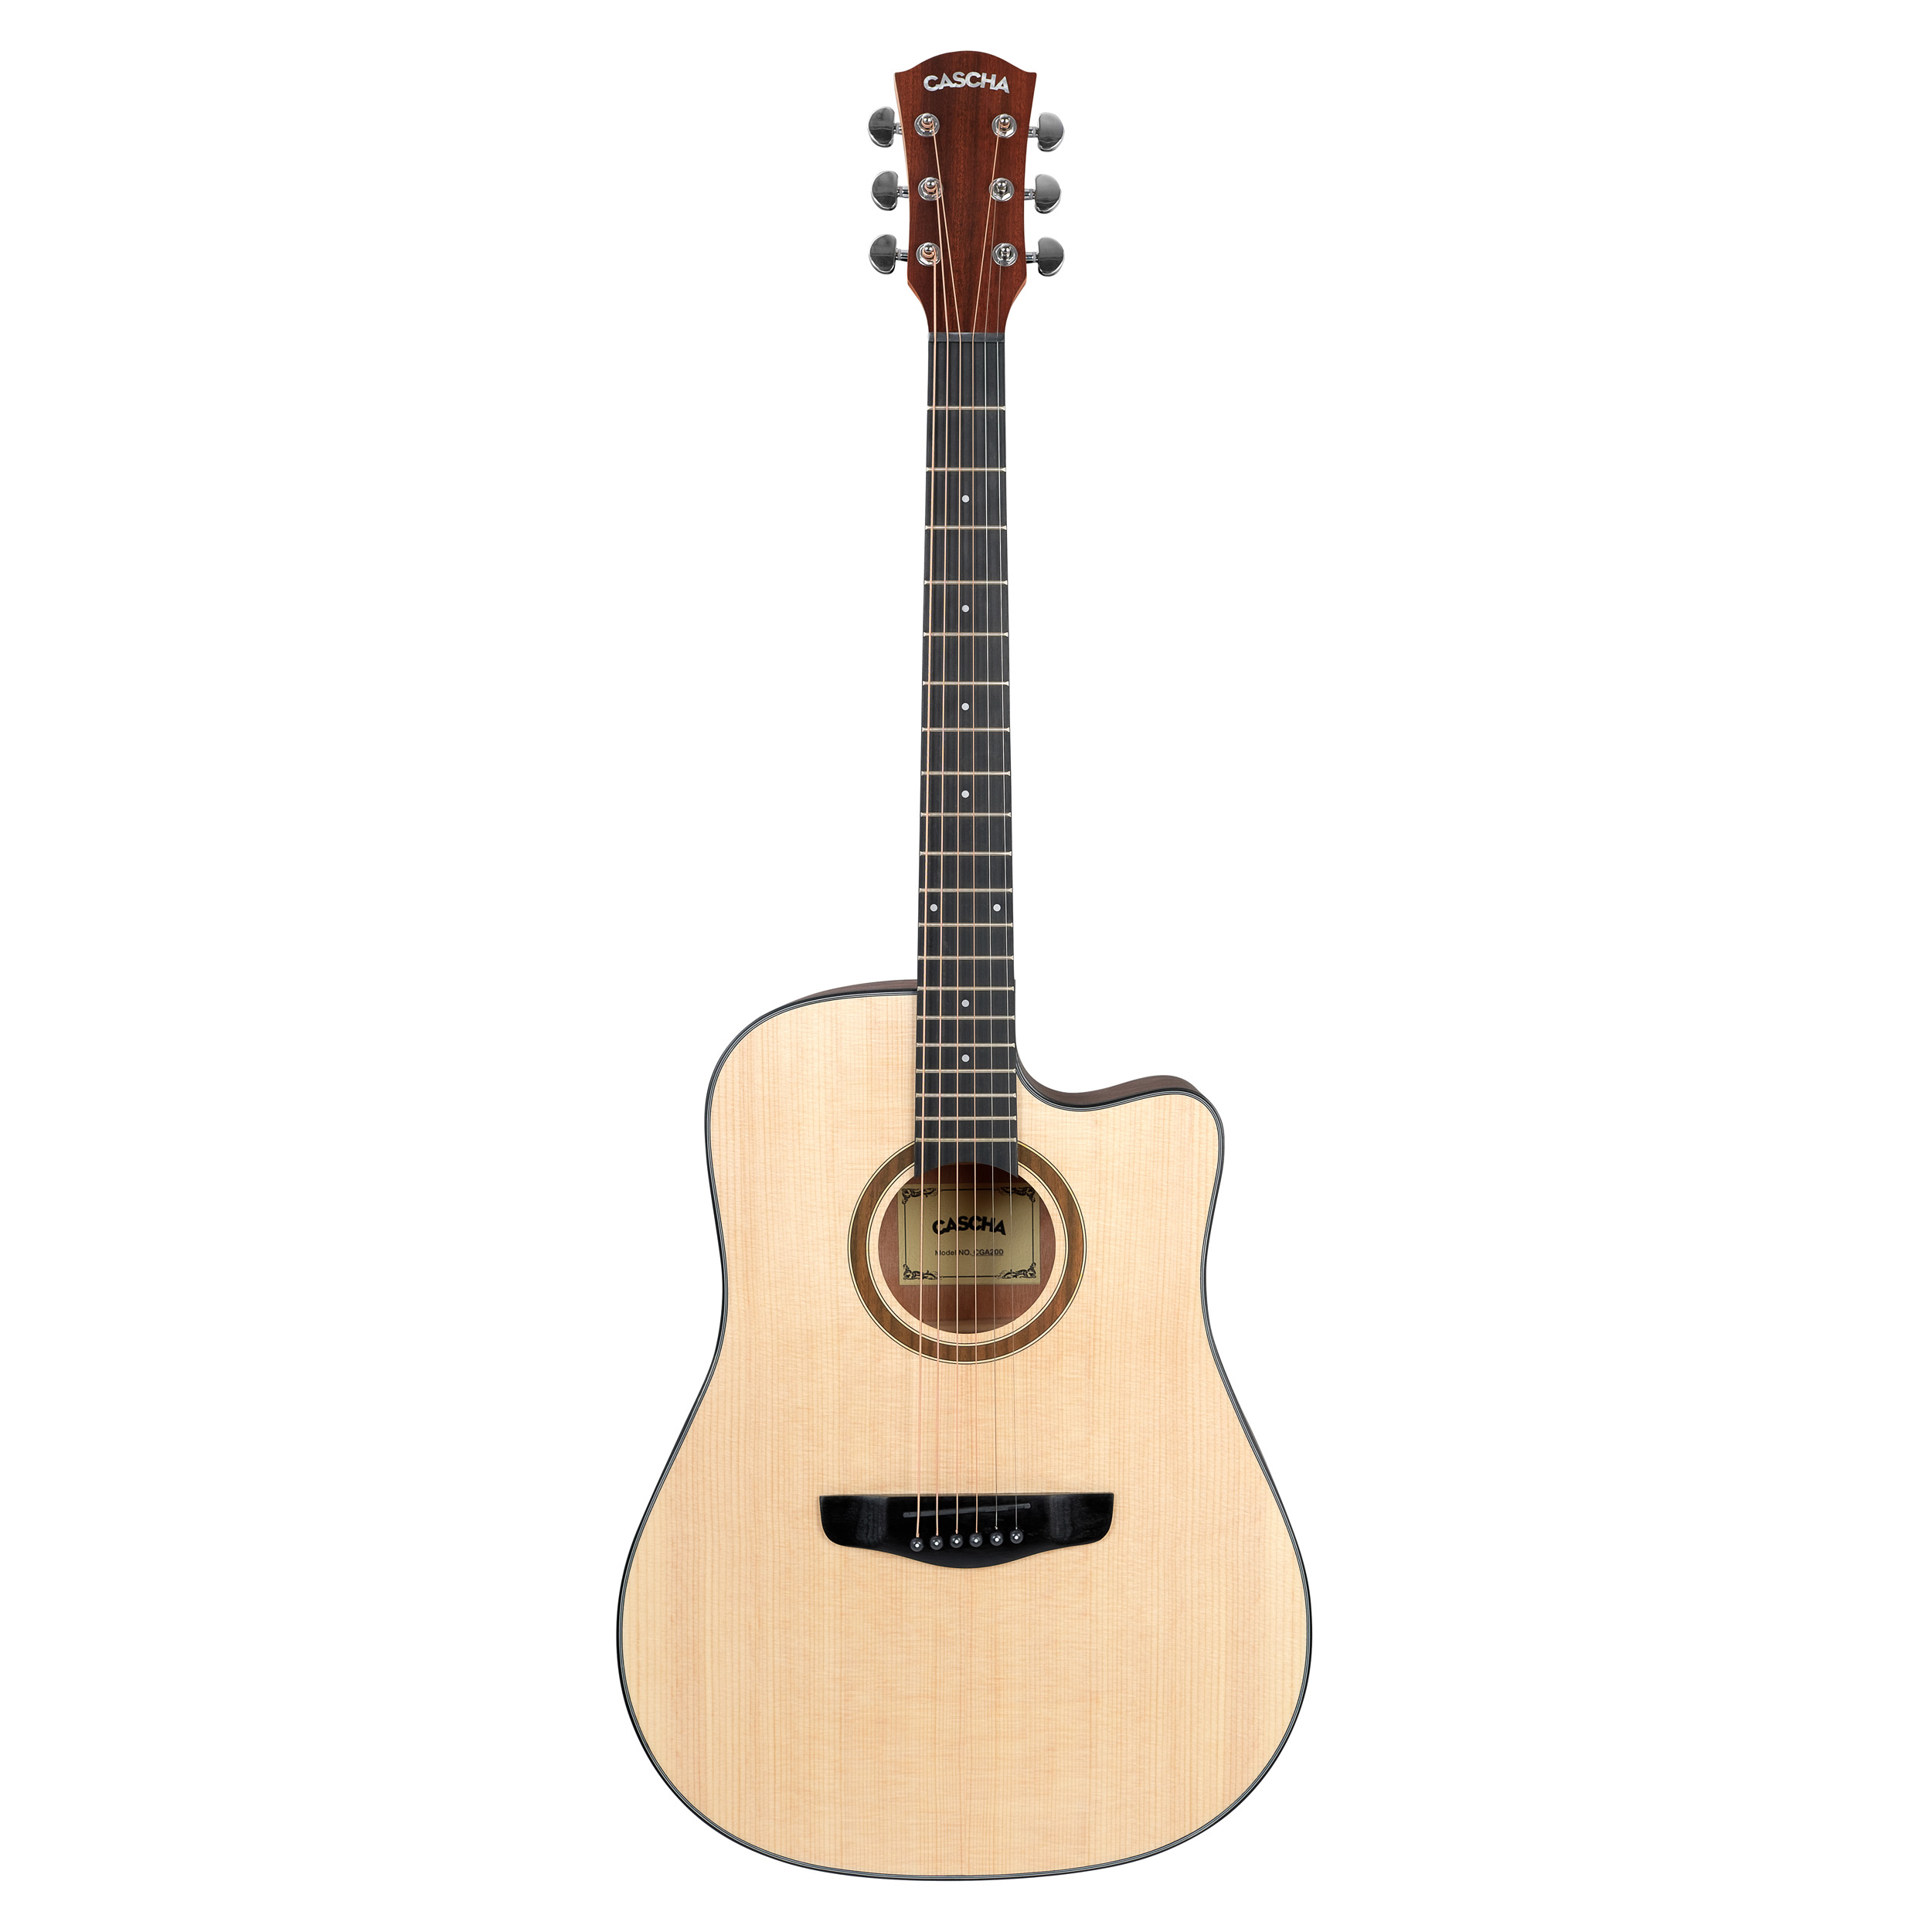 Stage Series Dreadnought Guitar with Spruce Top Product Photos 2